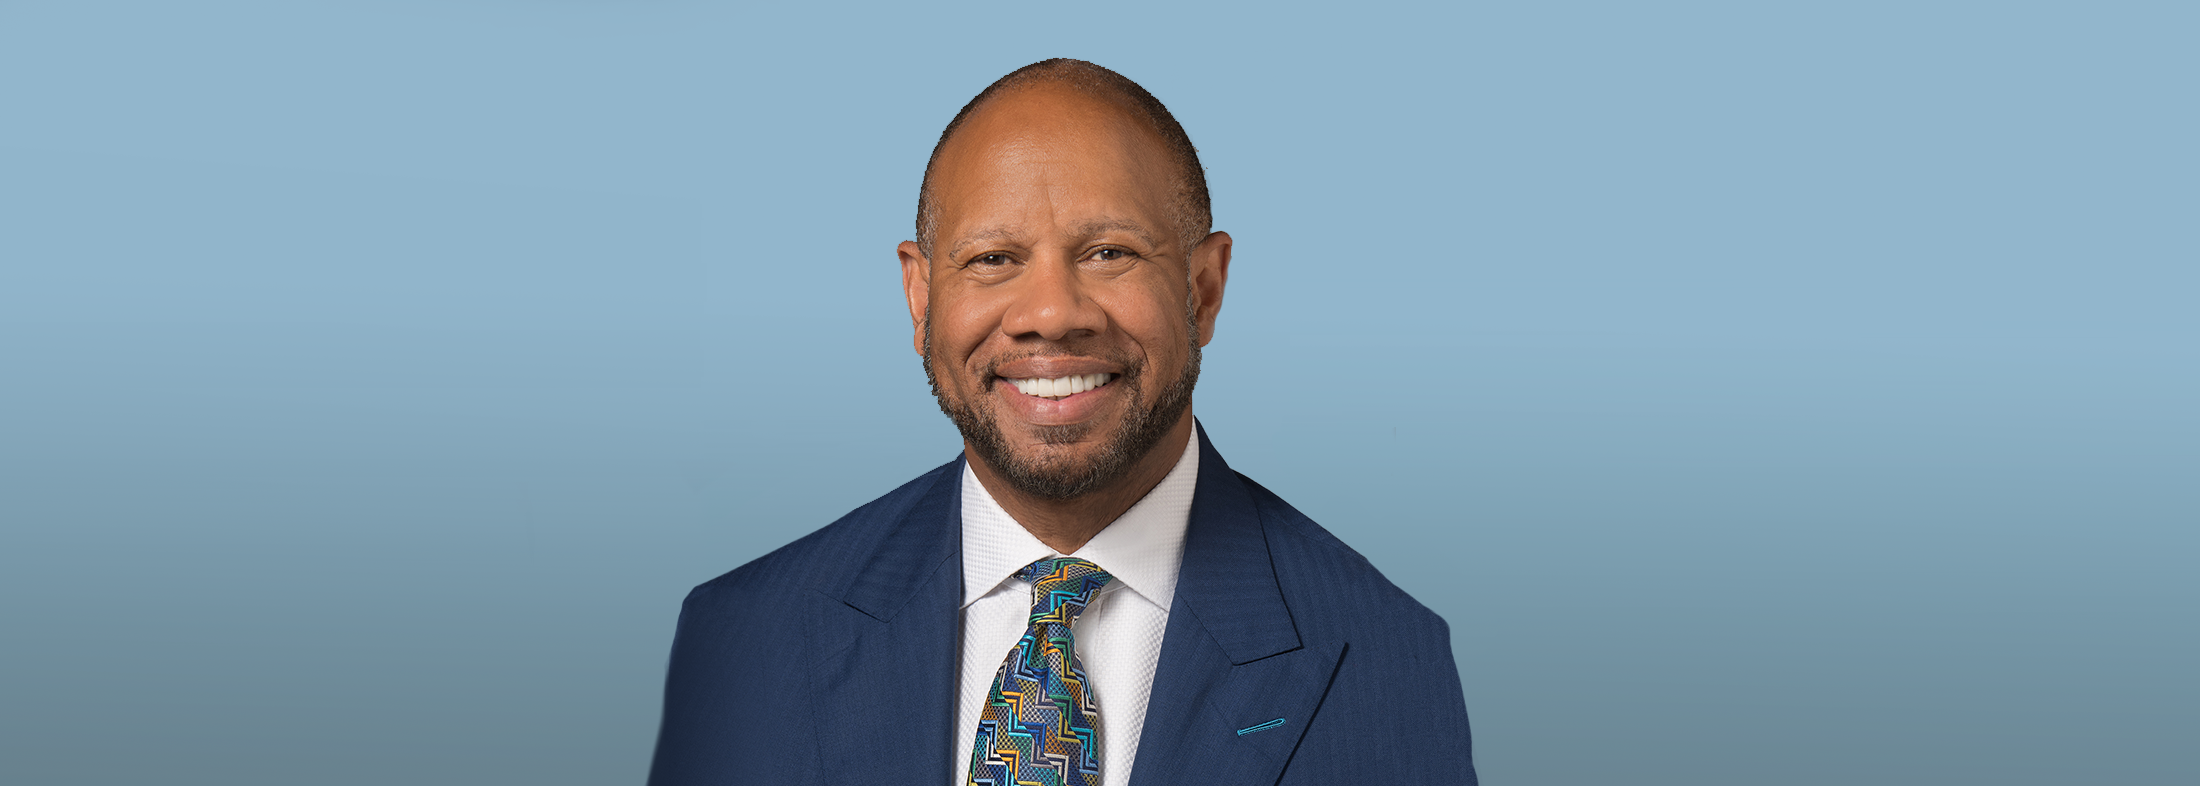 CommonSpirit Health announced today that following a national search, Wright L. Lassiter III will succeed Lloyd H. Dean as its next CEO starting on Aug. 1. Dean anno